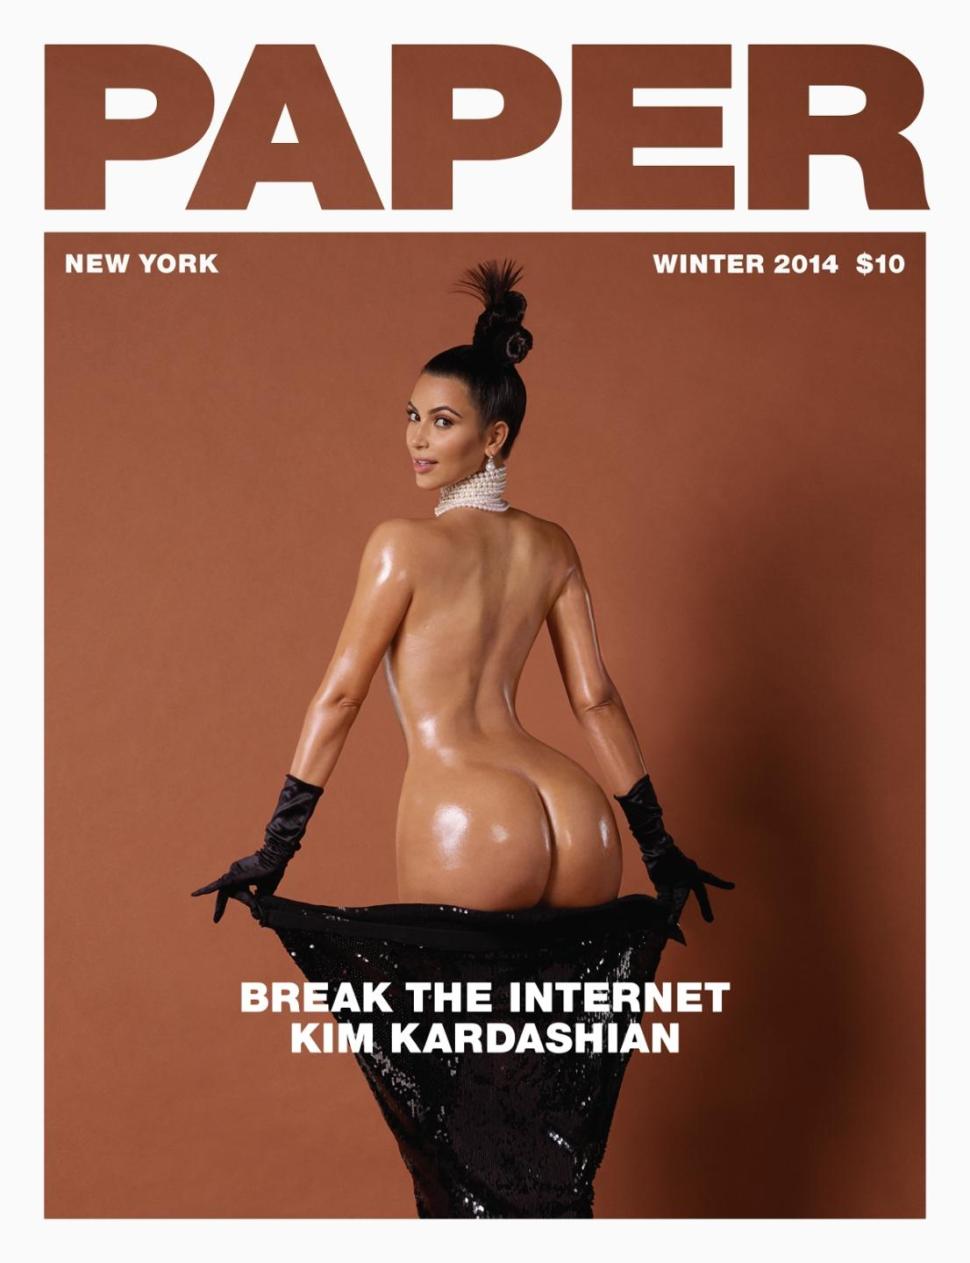 King’s photo and capton is a clear dig at the now infamous Paper Magazine cover featuring Kim Kardashian’s famous rear.